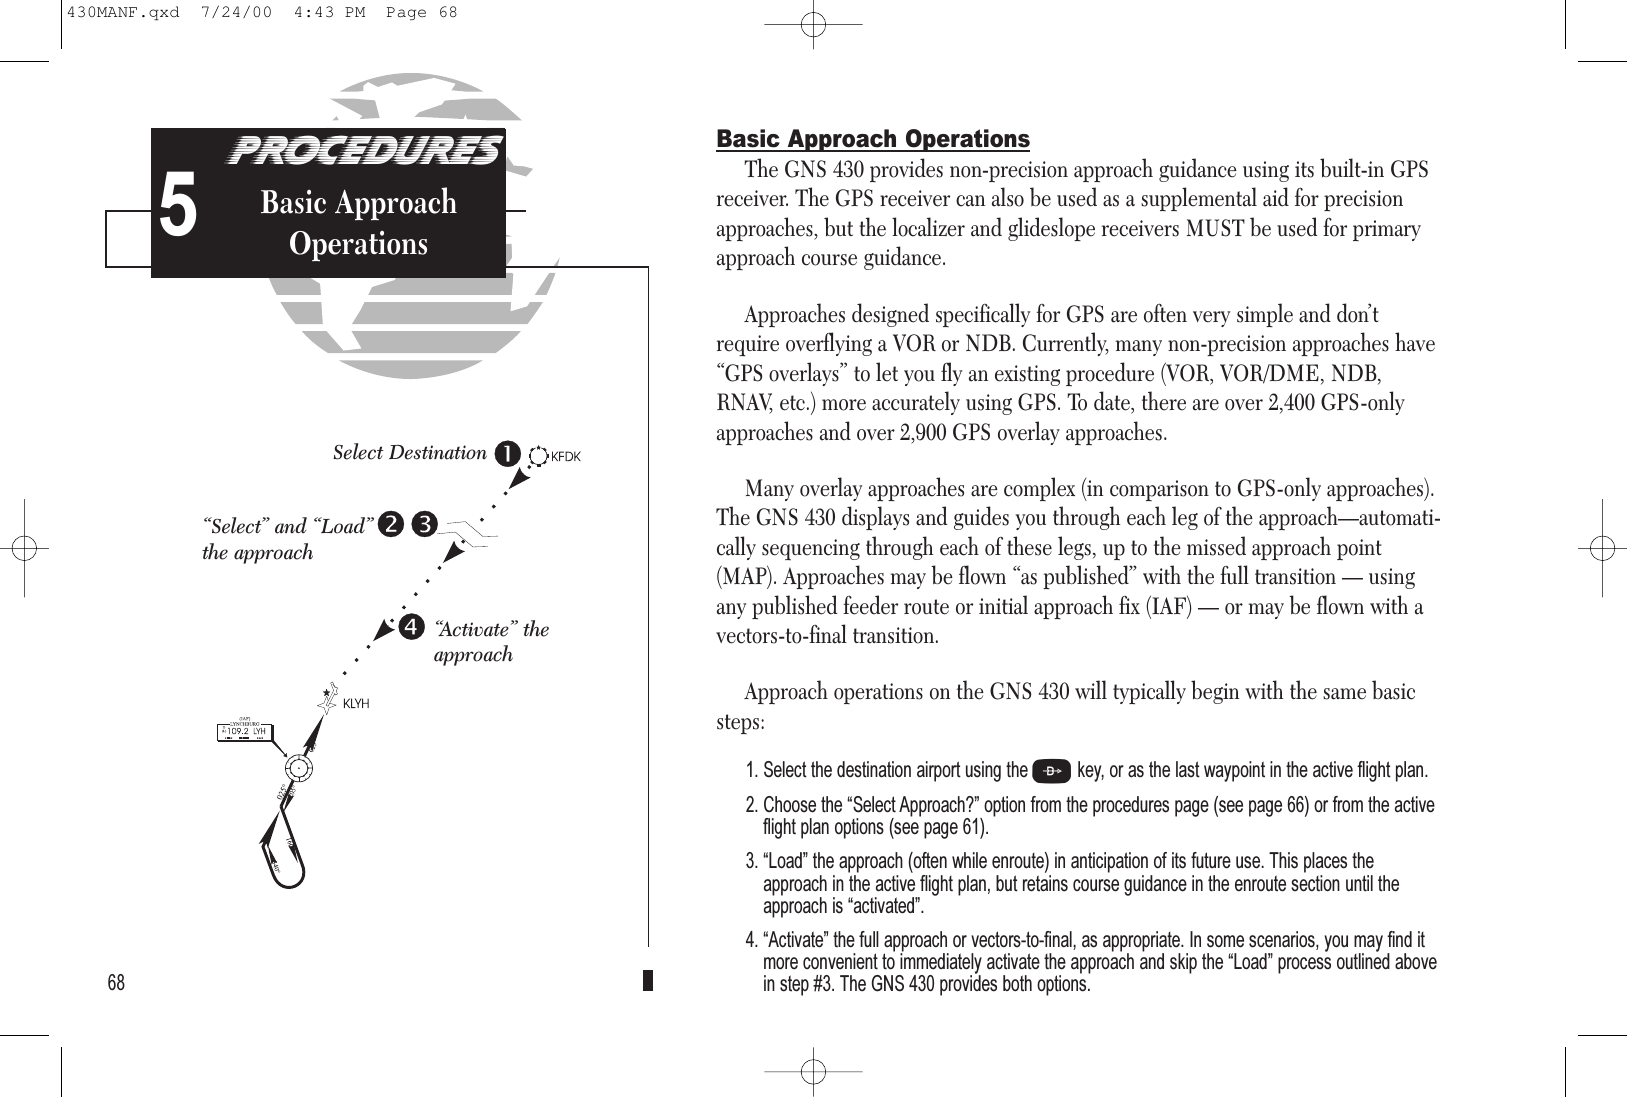 PROCEDURESApproach Examples5Basic Approach OperationsThe GNS 430 provides non-precision approach guidance using its built-in GPSreceiver. The GPS receiver can also be used as a supplemental aid for precisionapproaches, but the localizer and glideslope receivers MUST be used for primaryapproach course guidance.Approaches designed specifically for GPS are often very simple and don’trequire overflying a VOR or NDB. Currently, many non-precision approaches have“GPS overlays” to let you fly an existing procedure (VOR, VOR/DME, NDB,RNAV, etc.) more accurately using GPS. To date, there are over 2,400 GPS-onlyapproaches and over 2,900 GPS overlay approaches.Many overlay approaches are complex (in comparison to GPS-only approaches).The GNS 430 displays and guides you through each leg of the approach—automati-cally sequencing through each of these legs, up to the missed approach point(MAP). Approaches may be flown “as published” with the full transition — usingany published feeder route or initial approach fix (IAF) — or may be flown with a vectors-to-final transition.Approach operations on the GNS 430 will typically begin with the same basicsteps:1. Select the destination airport using the Dkey, or as the last waypoint in the active flight plan.2. Choose the Select Approach? option from the procedures page (see page 66) or from the activeflight plan options (see page 61).3. Load the approach (often while enroute) in anticipation of its future use. This places theapproach in the active flight plan, but retains course guidance in the enroute section until theapproach is activated.4. Activate the full approach or vectors-to-final, as appropriate. In some scenarios, you may find itmore convenient to immediately activate the approach and skip the Load process outlined abovein step #3. The GNS 430 provides both options.68PROCEDURESBasic ApproachOperationsSelect Destination“Select” and “Load”the approach“Activate” theapproach5430MANF.qxd  7/24/00  4:43 PM  Page 68